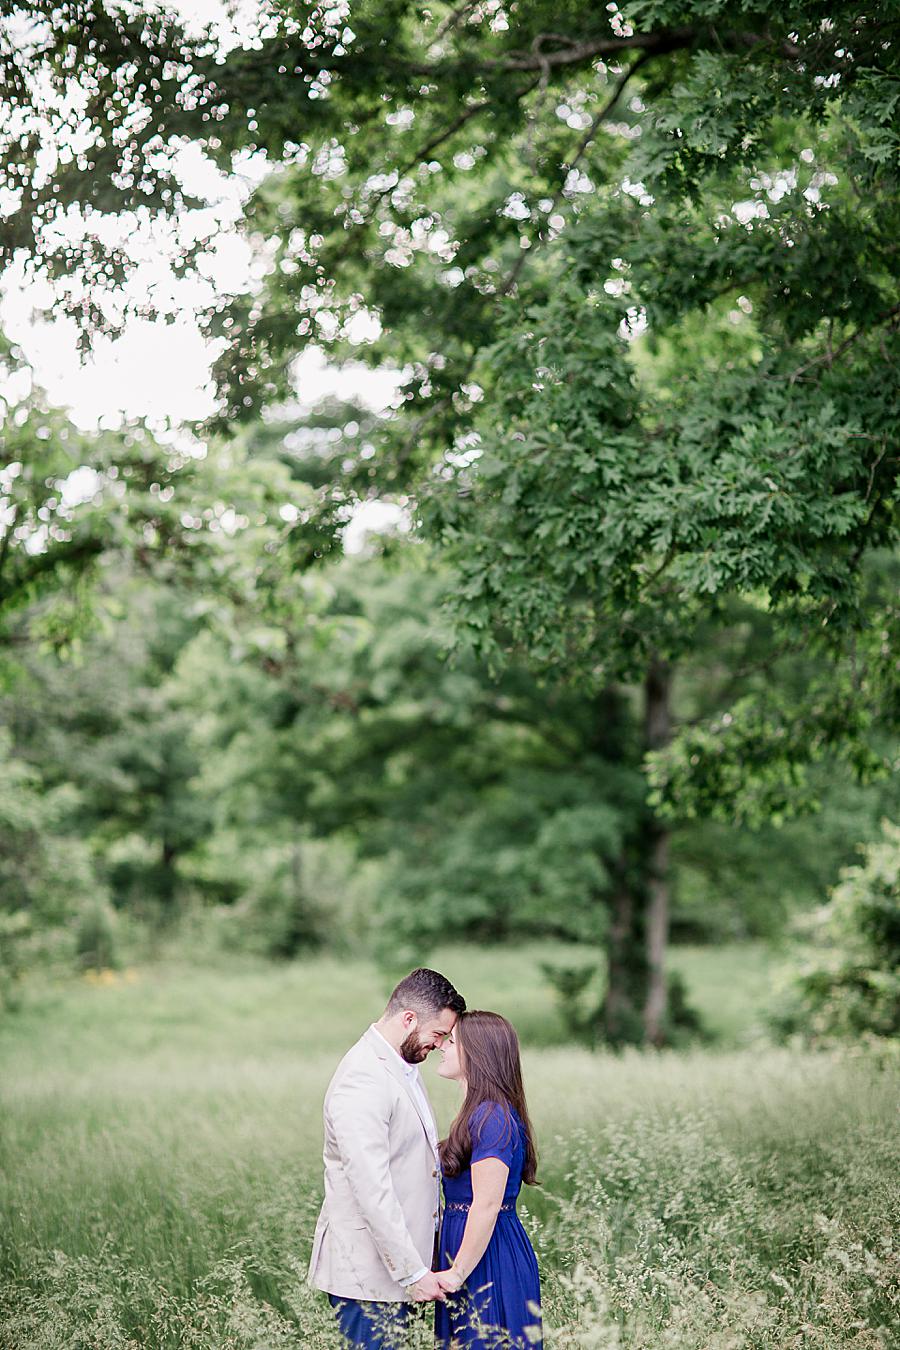 Foreheads together at this Castleton by Knoxville Wedding Photographer, Amanda May Photos.